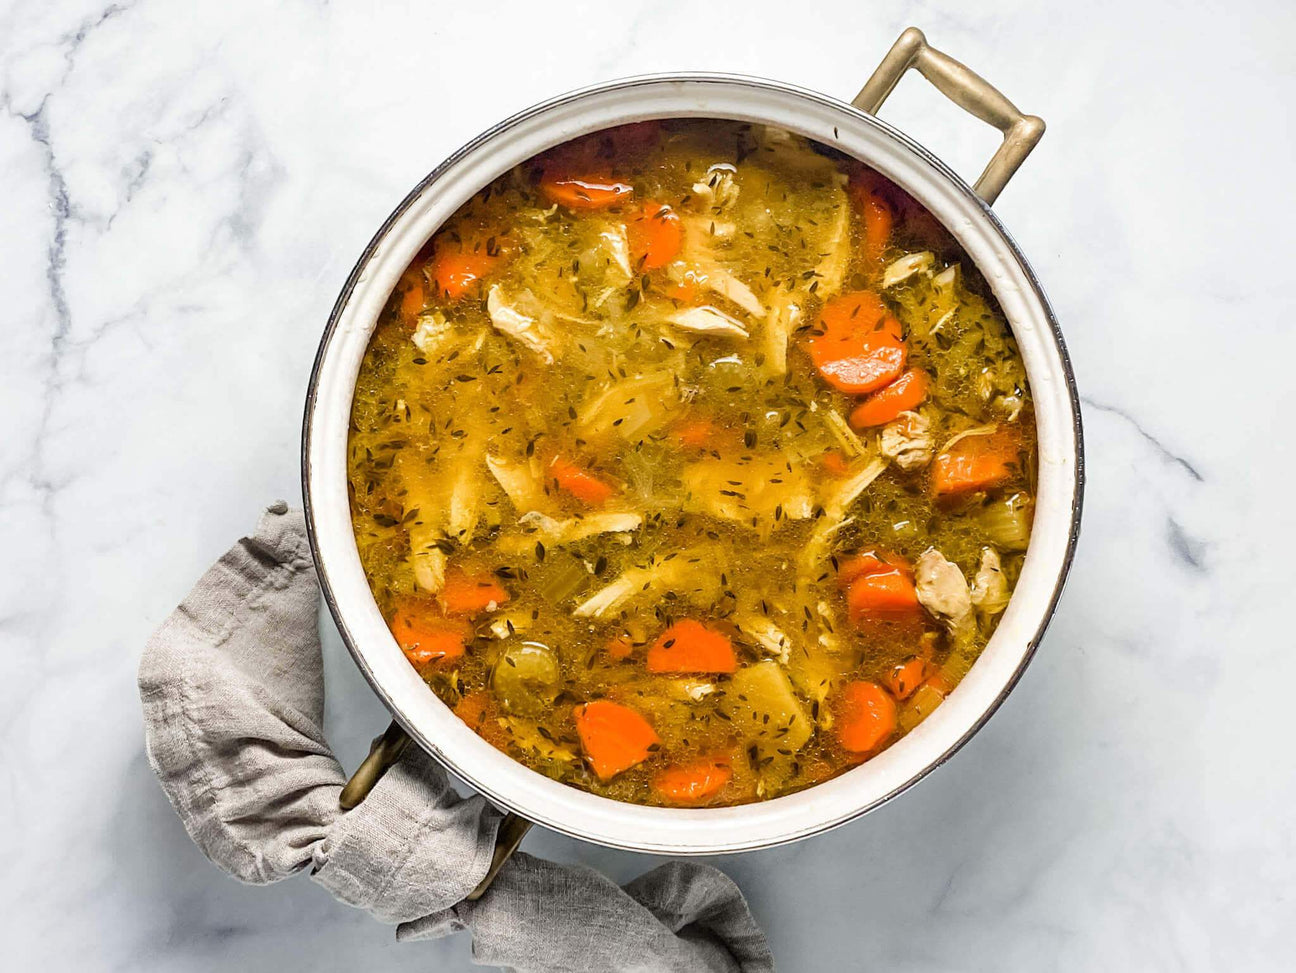 Hearty Chicken Noodle Soup with Ginger and Saffron